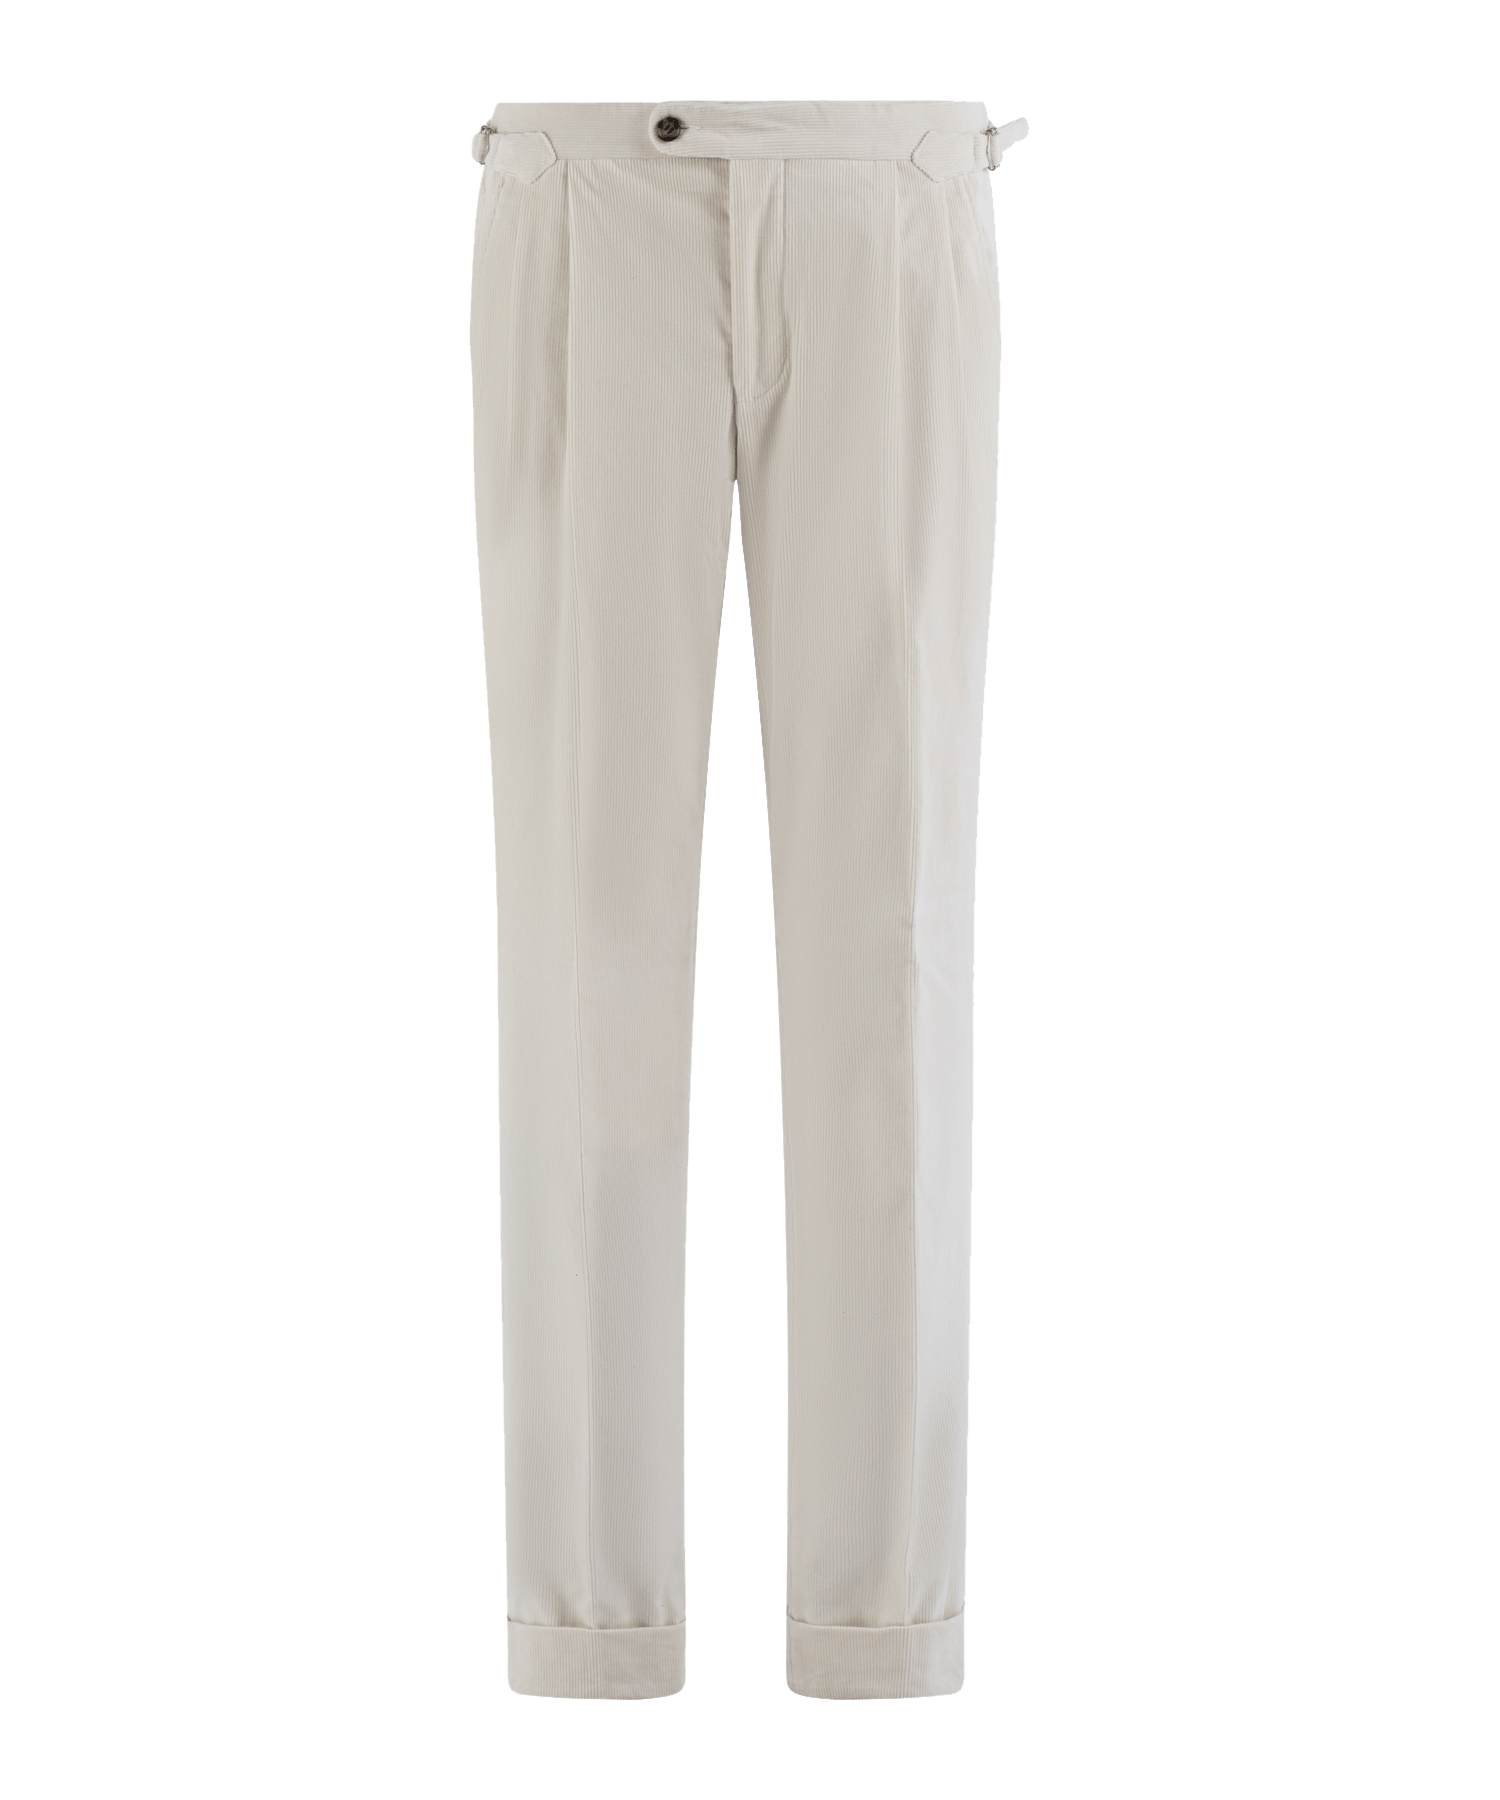 TROUSERS SF CO EL 46 / Off-white